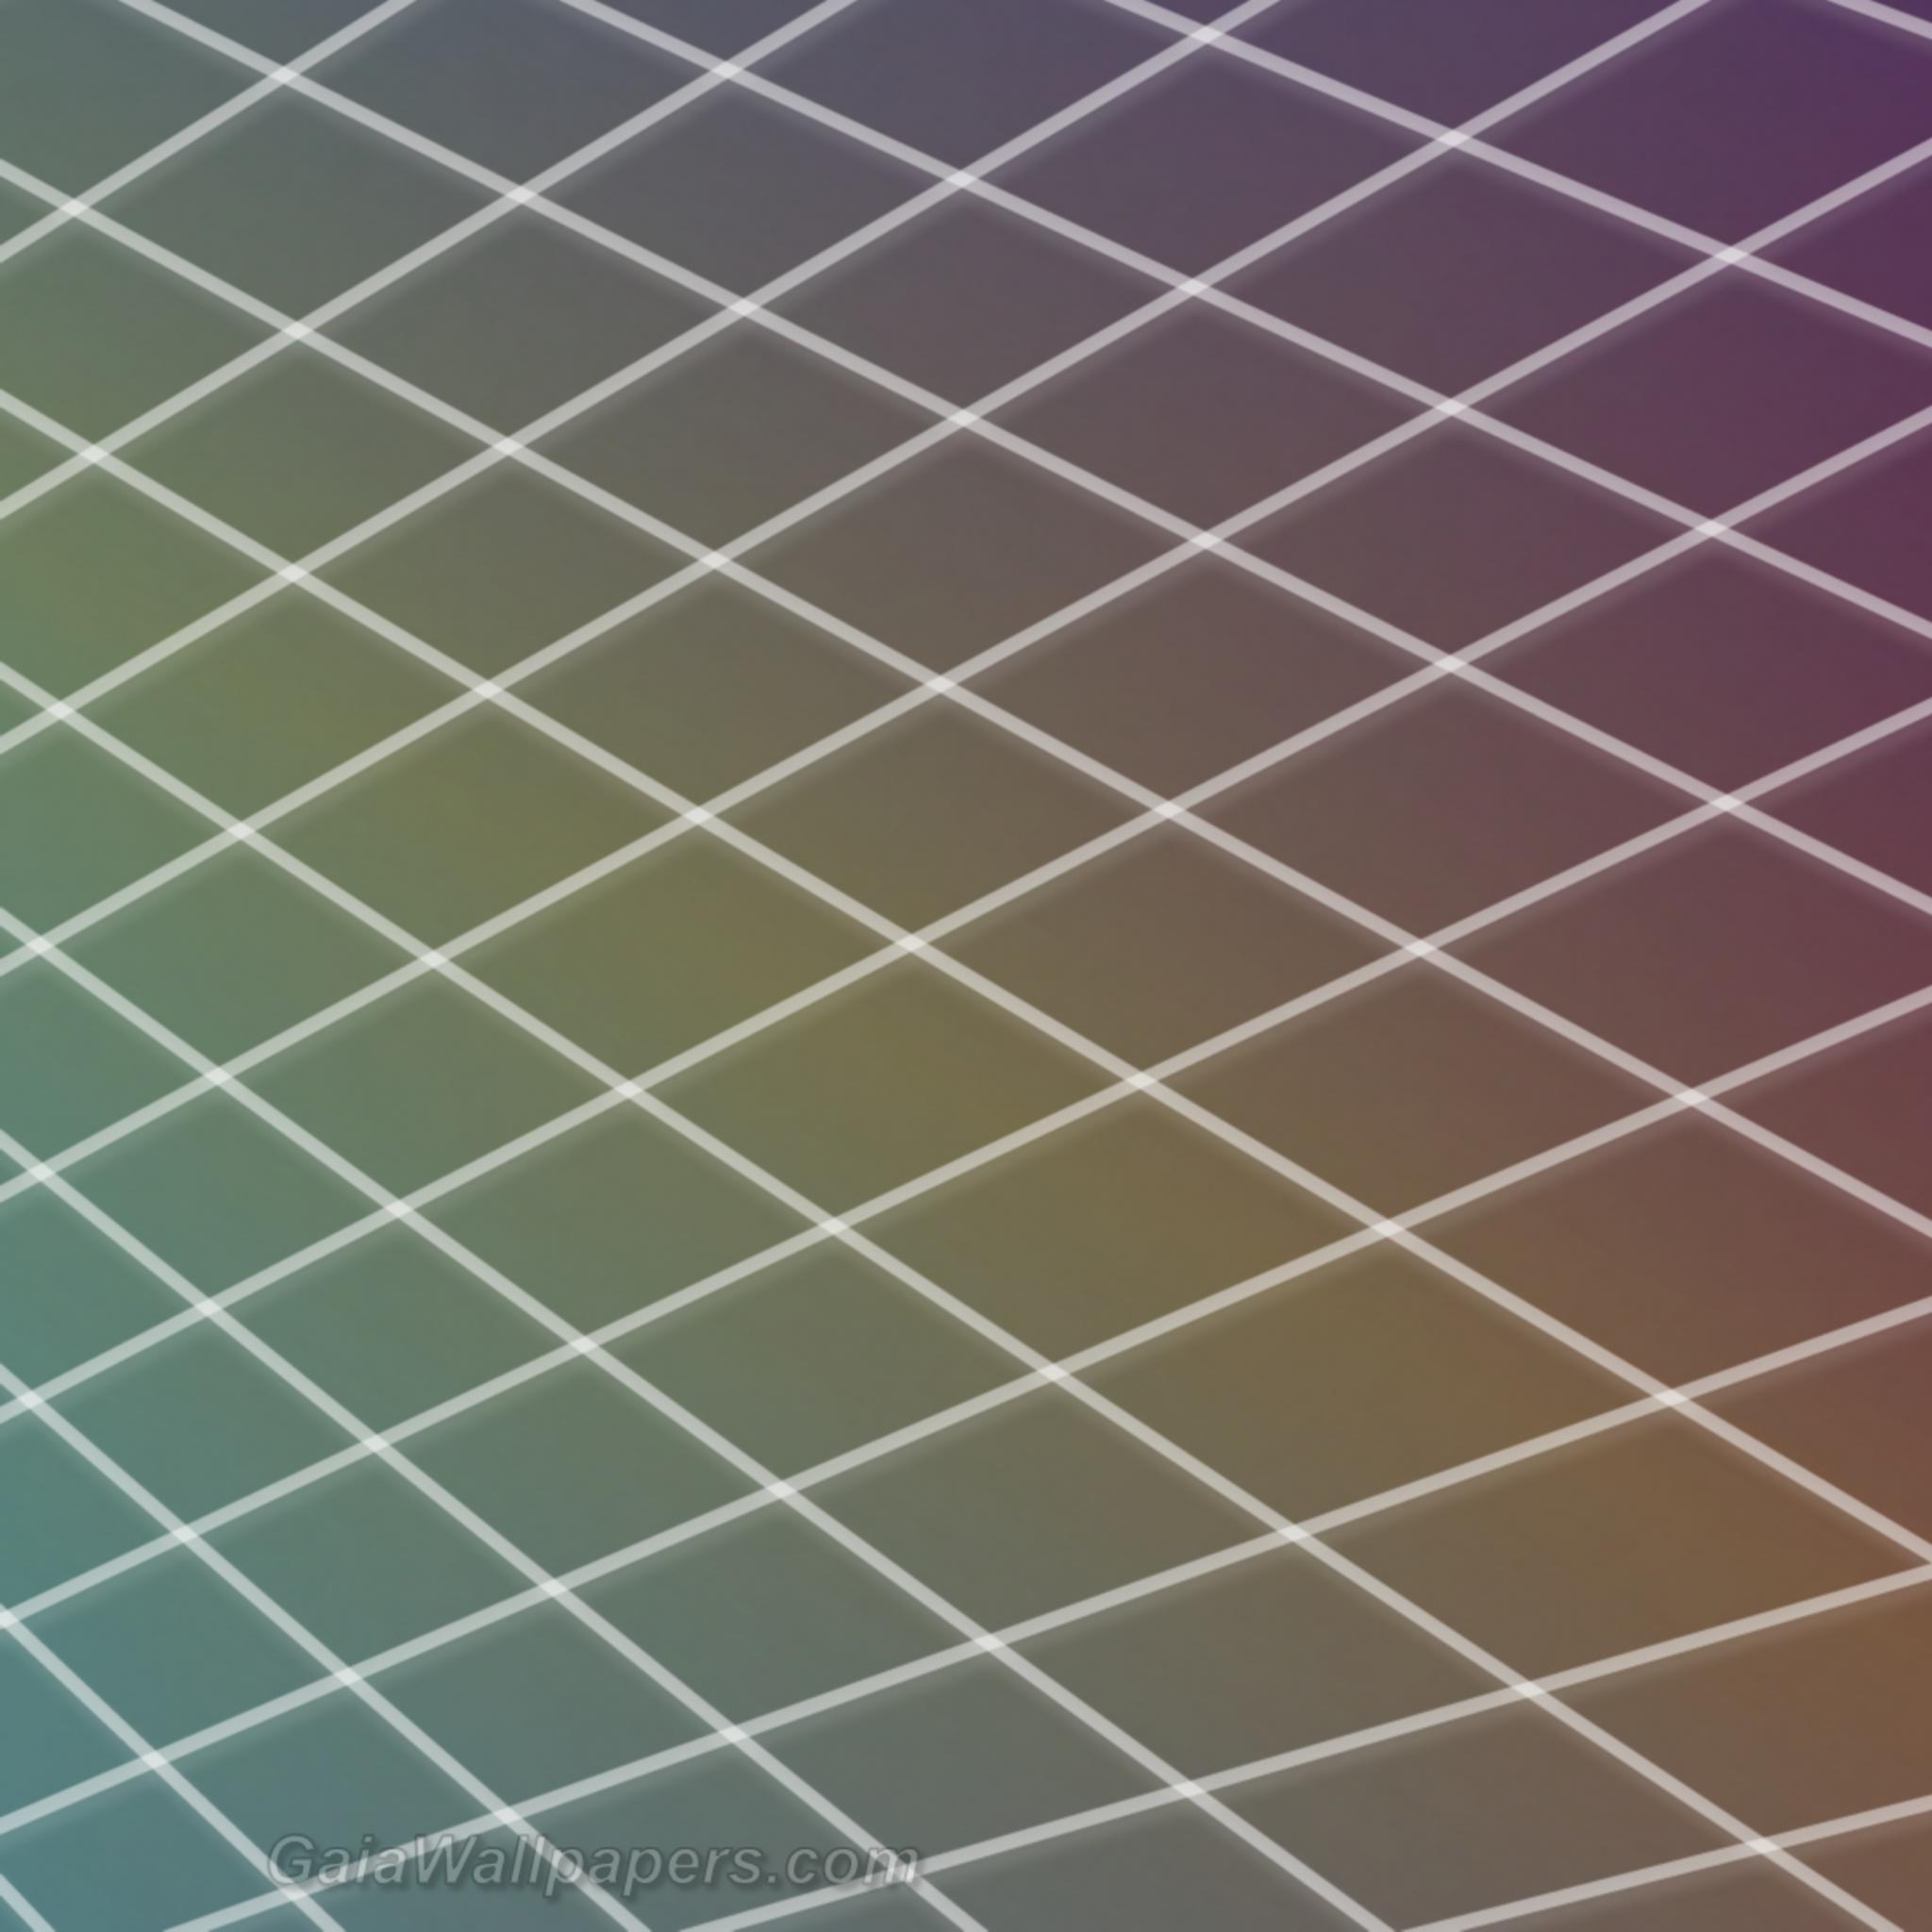 Grid on the colors - Free desktop wallpapers